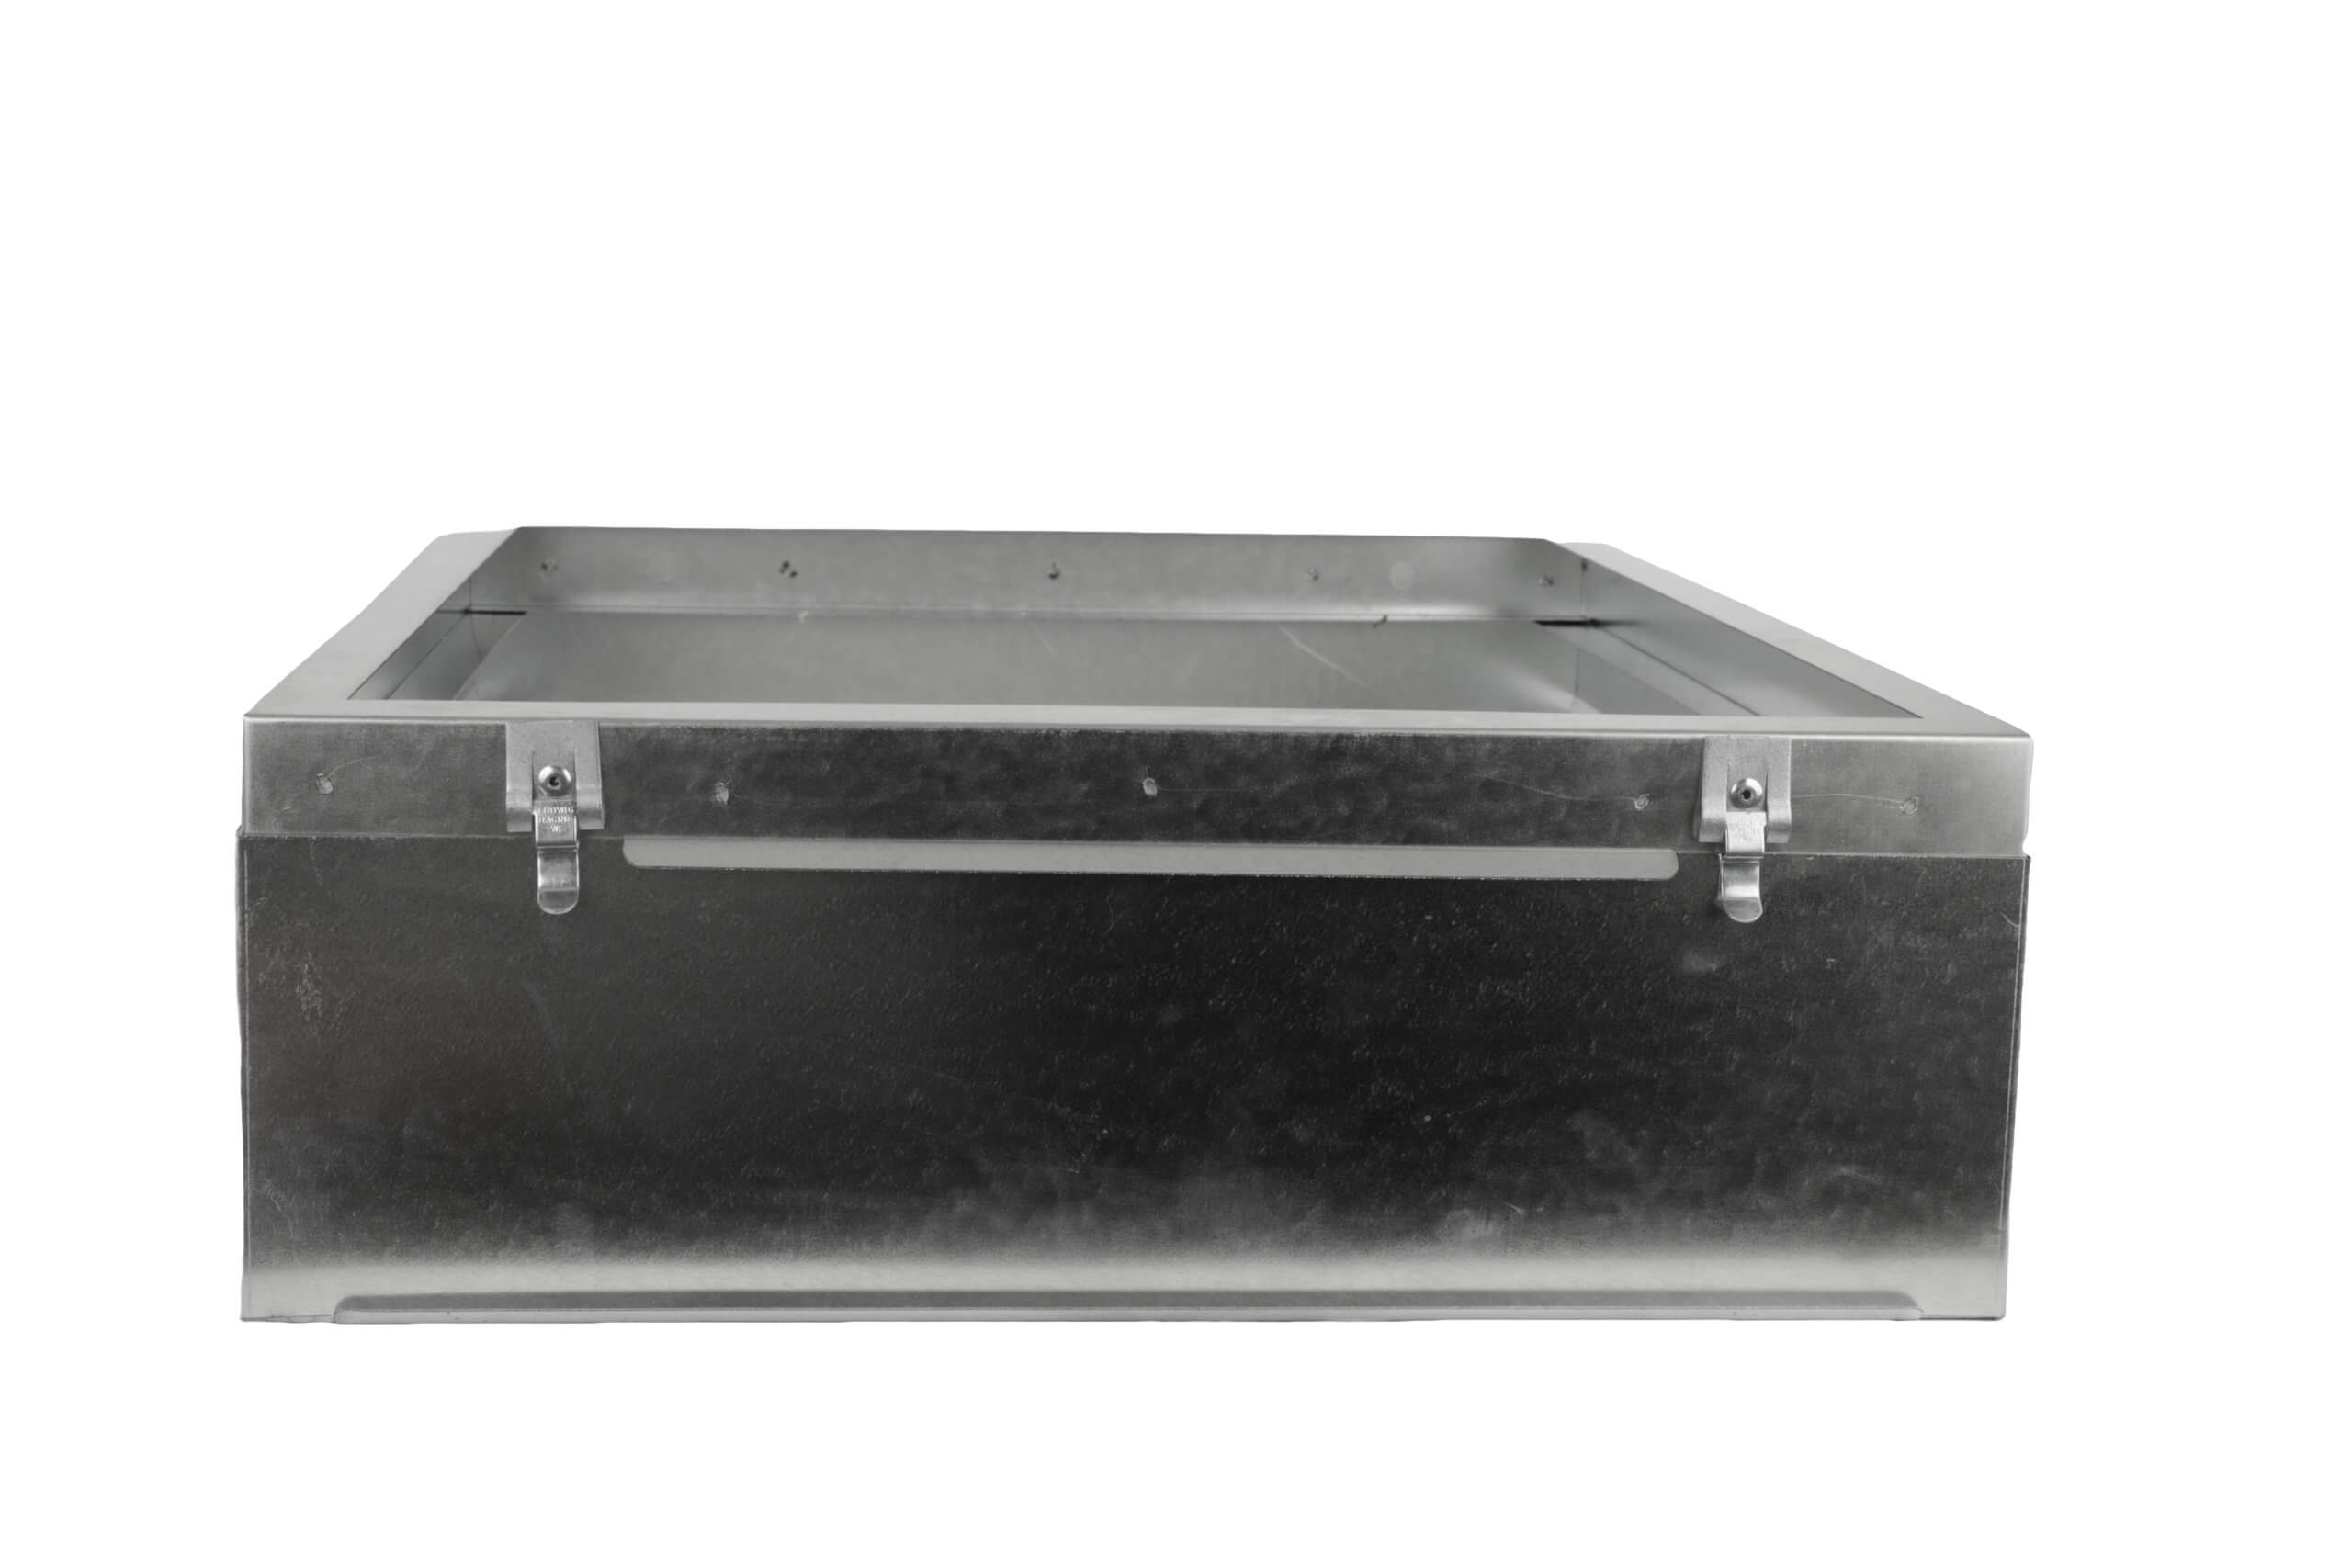 FAMCO Furnace Filter Rack Base - Galvanized Steel (Closed Front View)